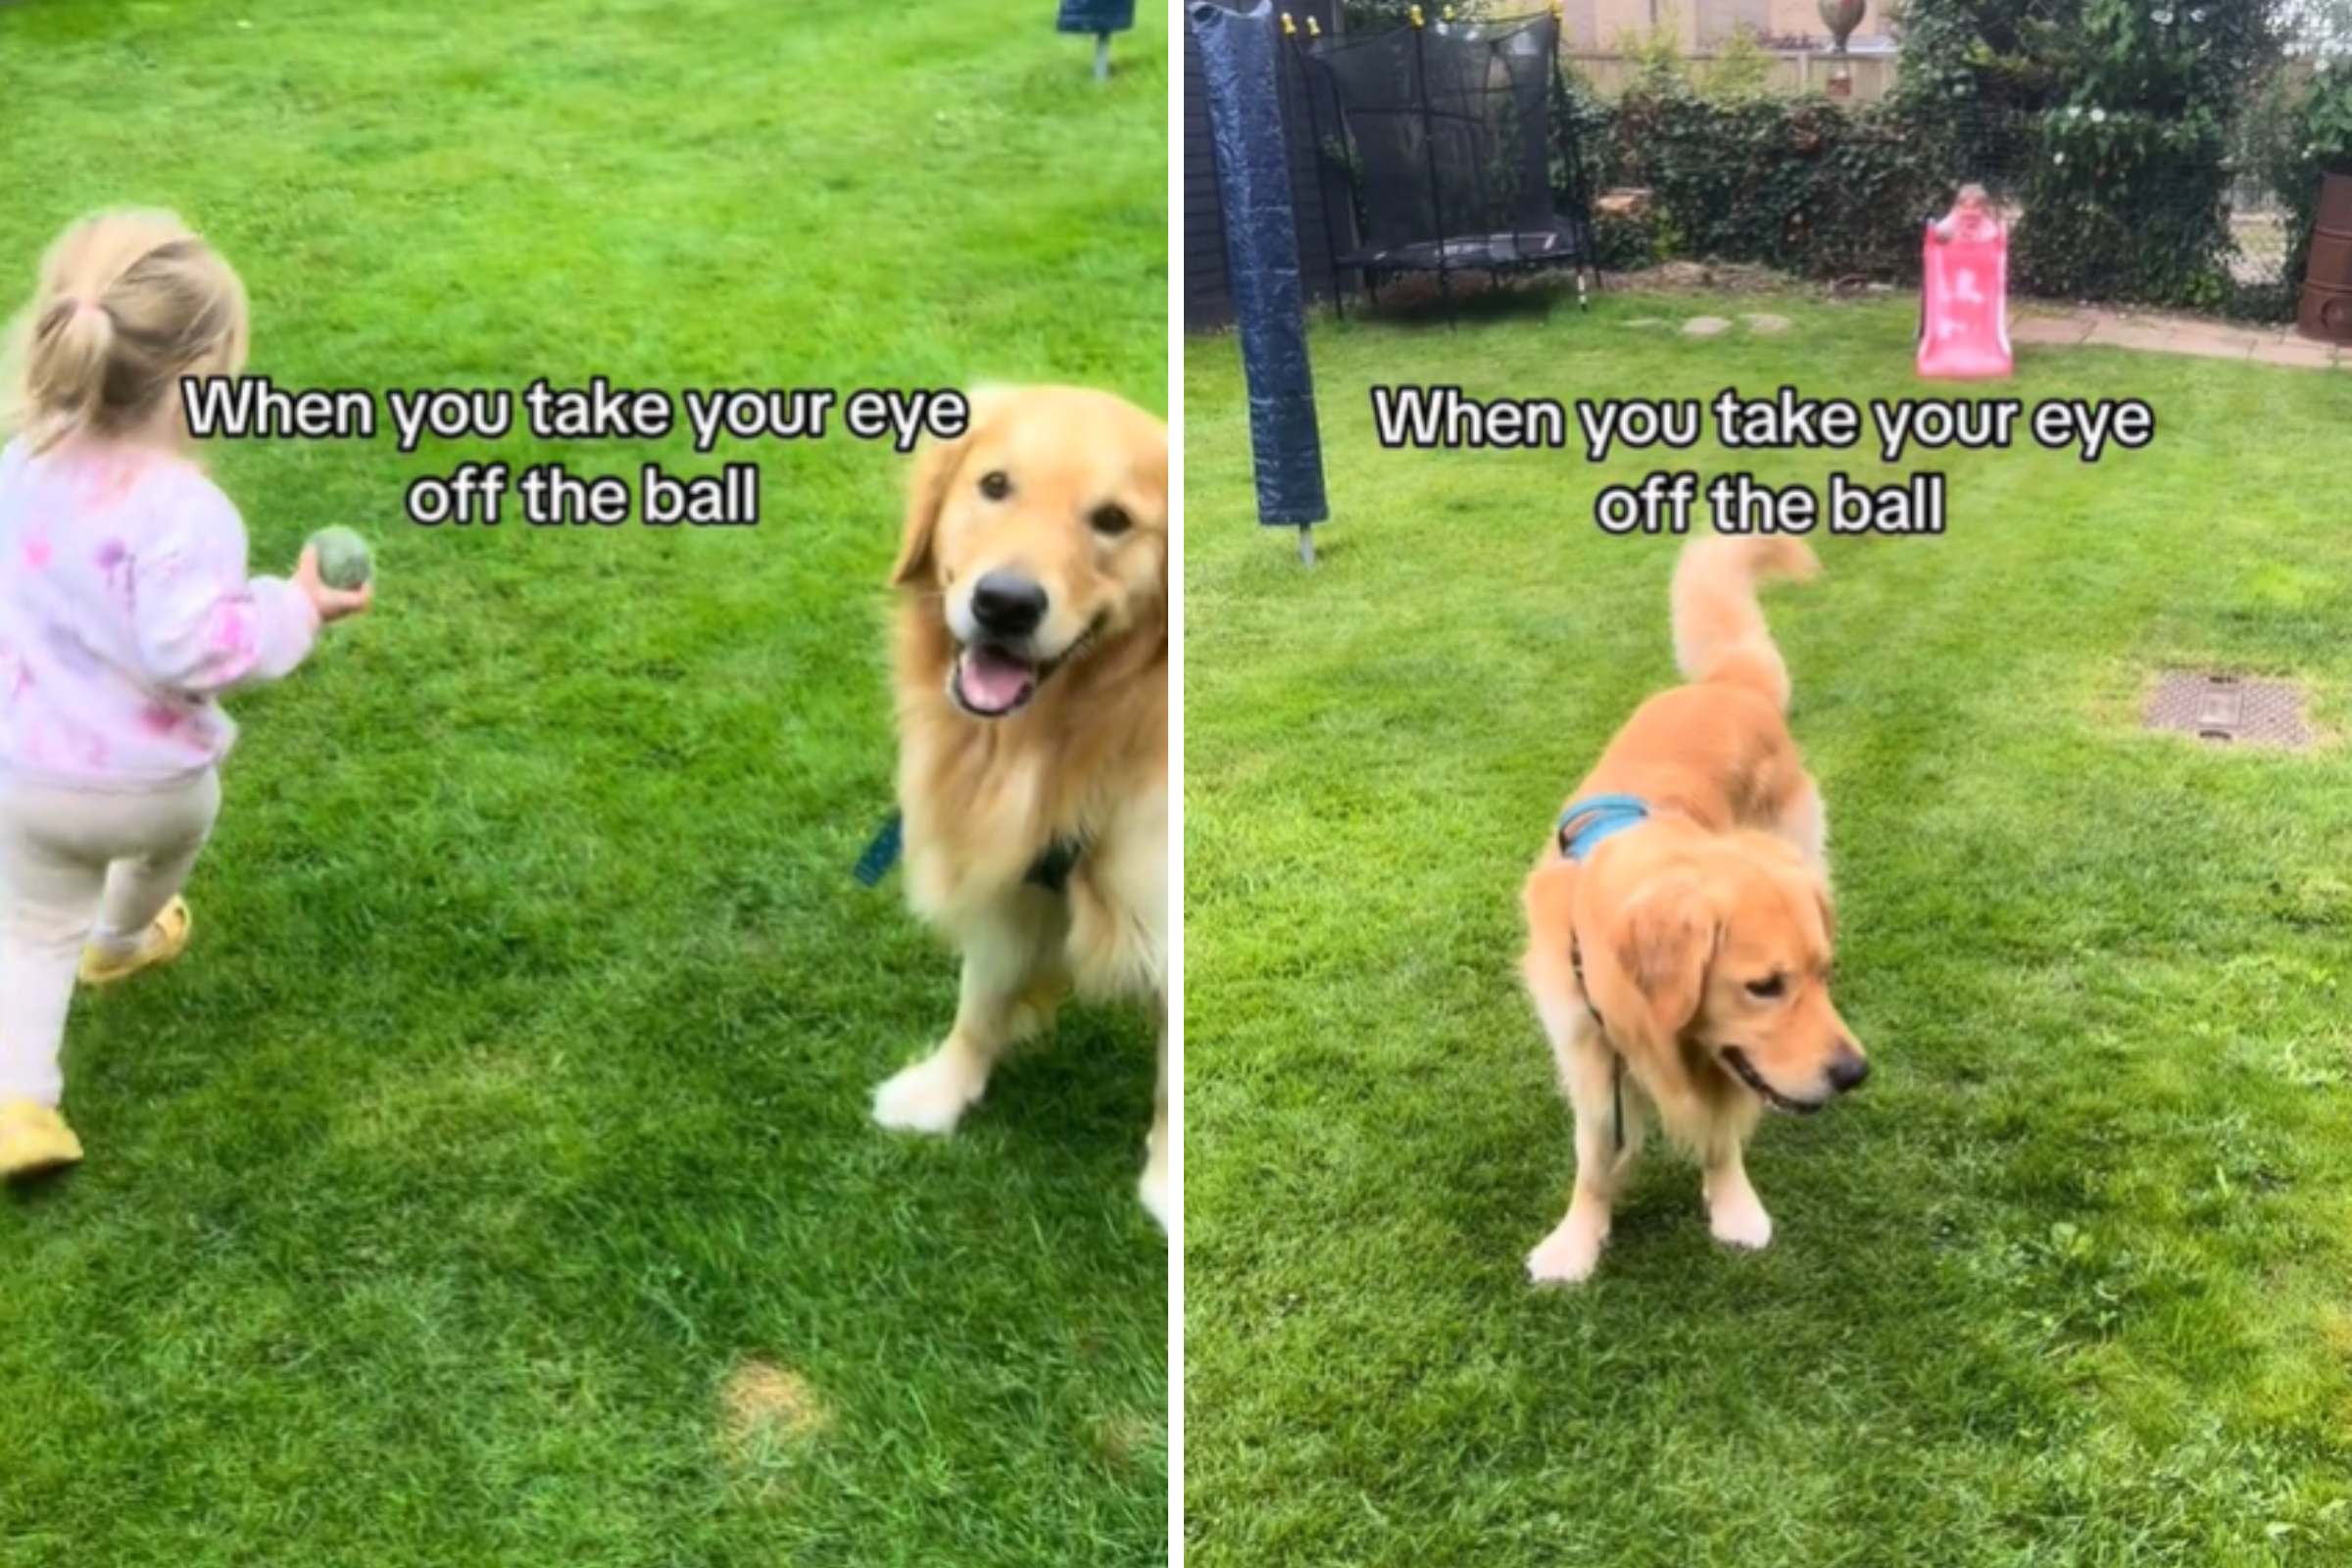 Golden retriever plays ball with girl, makes a terrible mistake